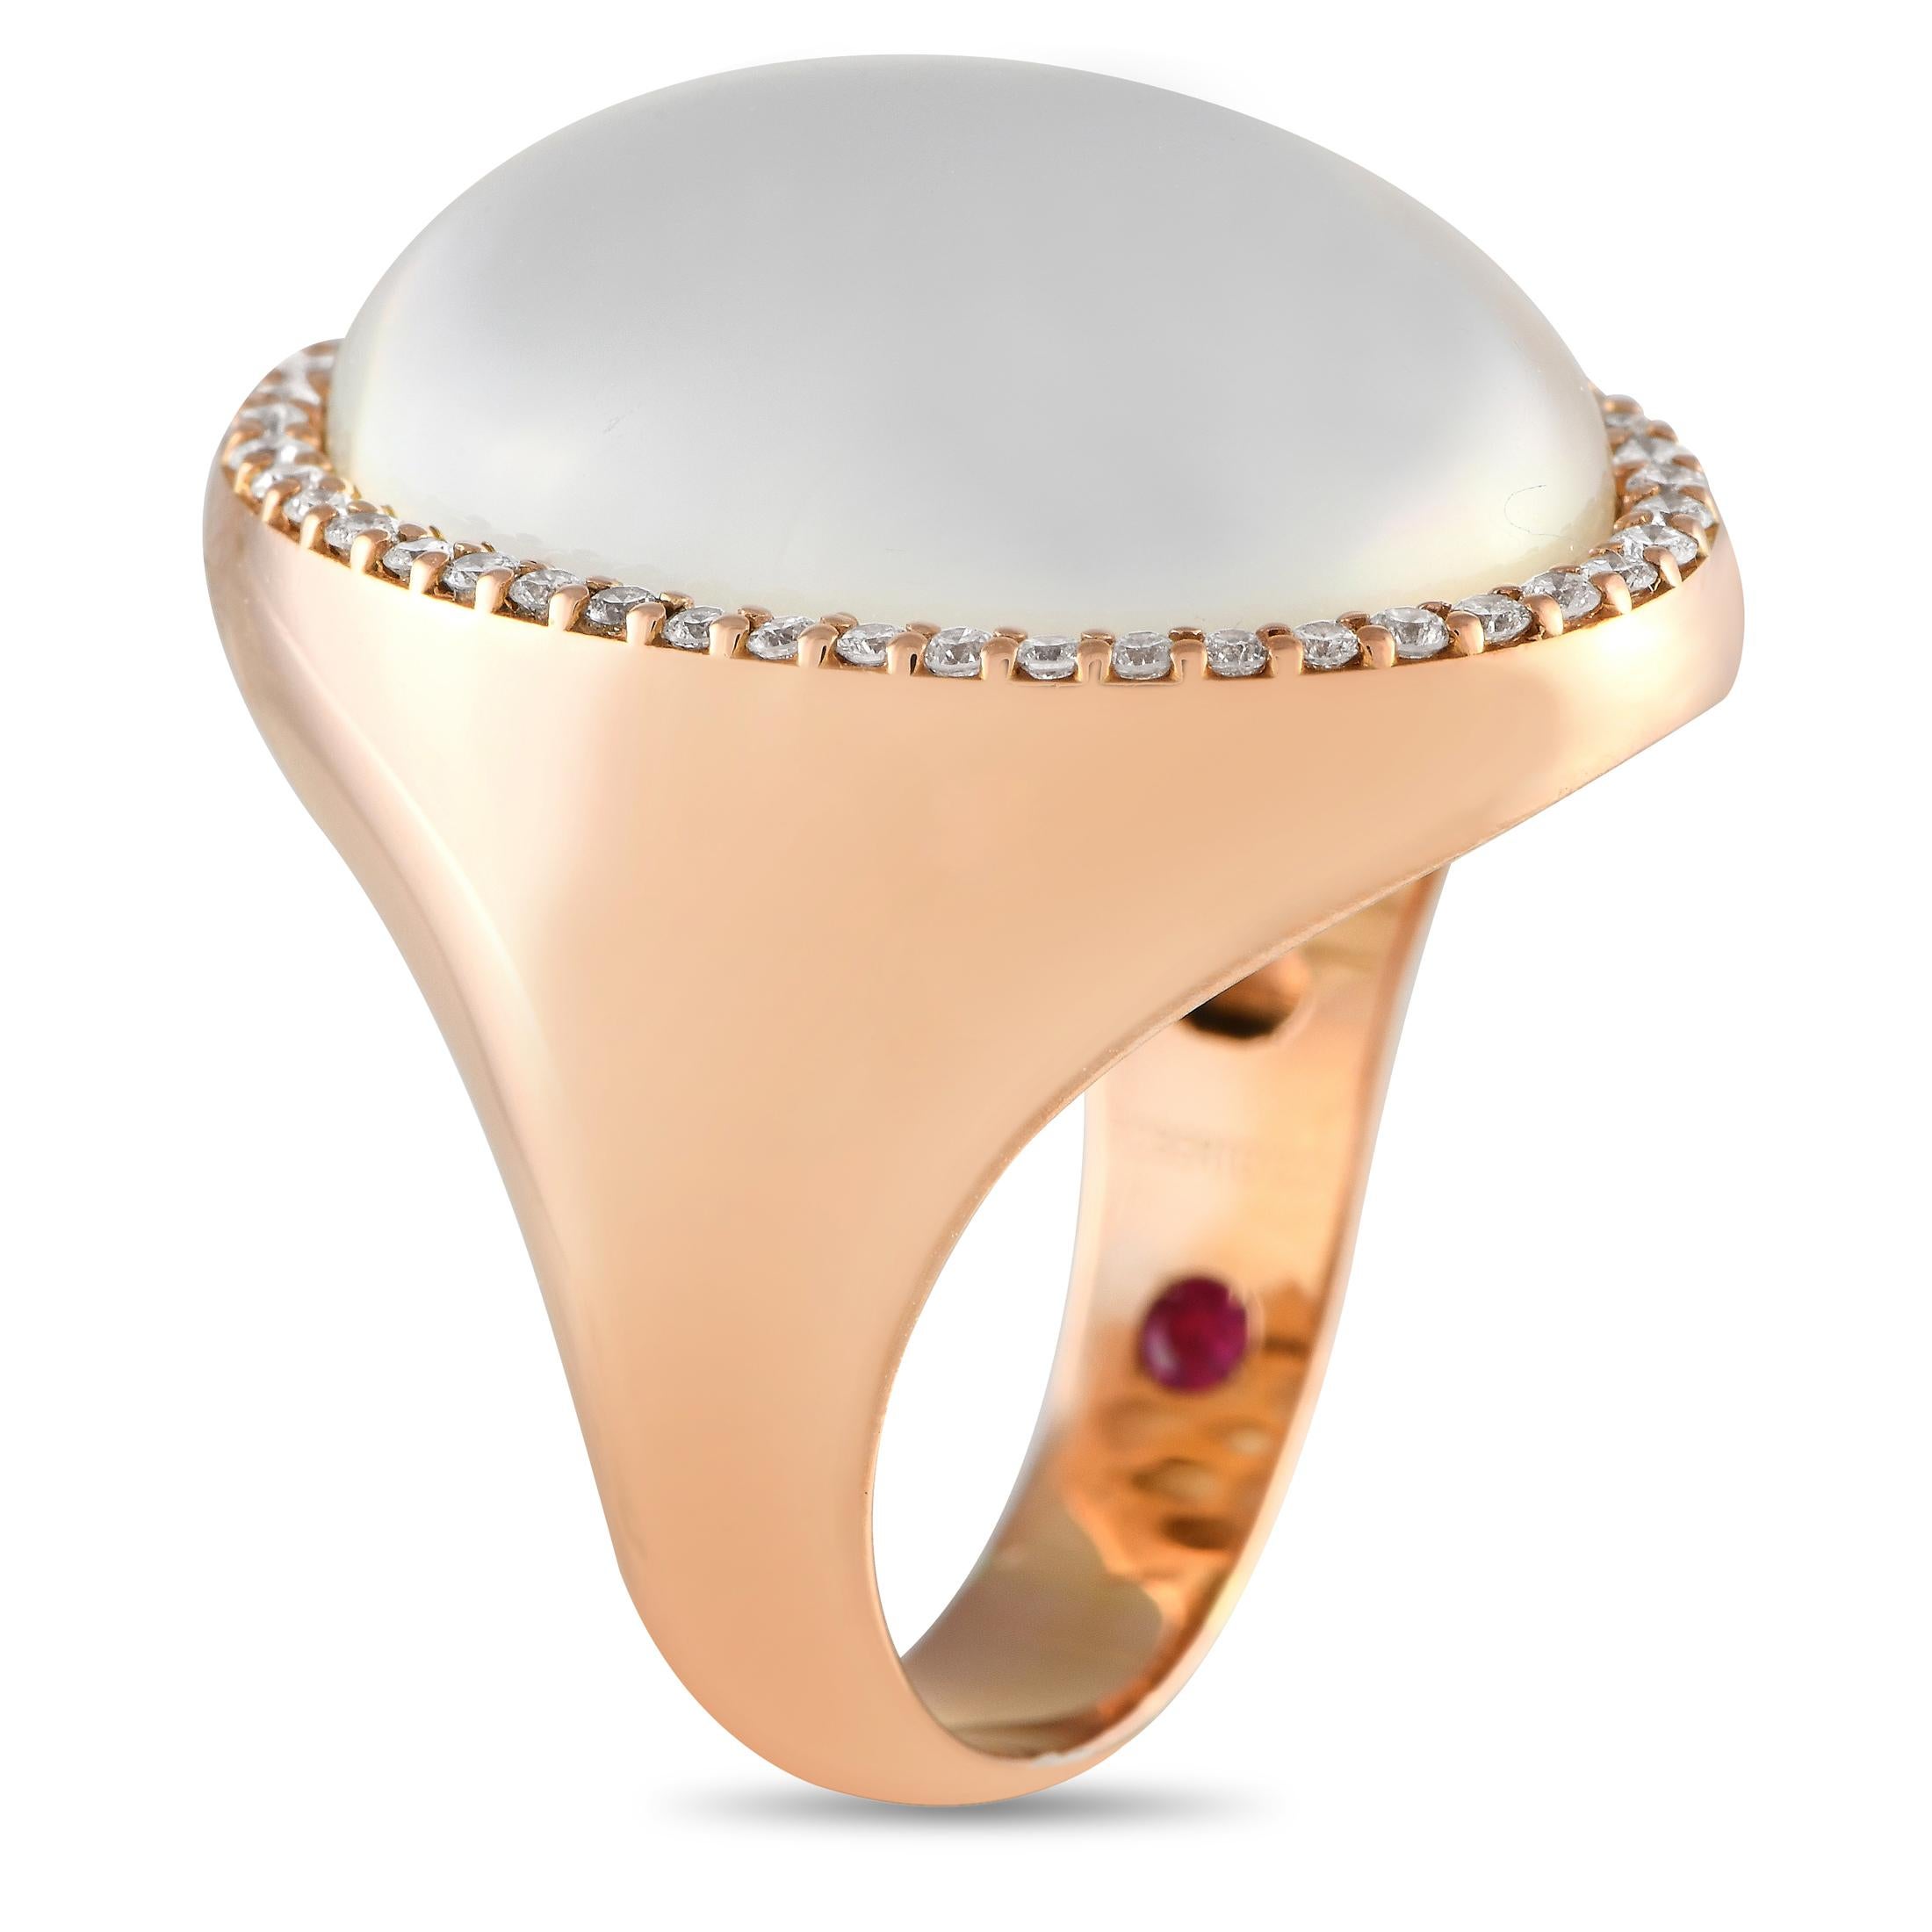 This Roberto Coin ring will serve as a breathtaking addition to any ensemble. At the center of the shimmering 18K Rose Gold setting, youll find a bold Mother of Pearl center stone surrounded by a halo of sparkling Diamonds with a total weight of